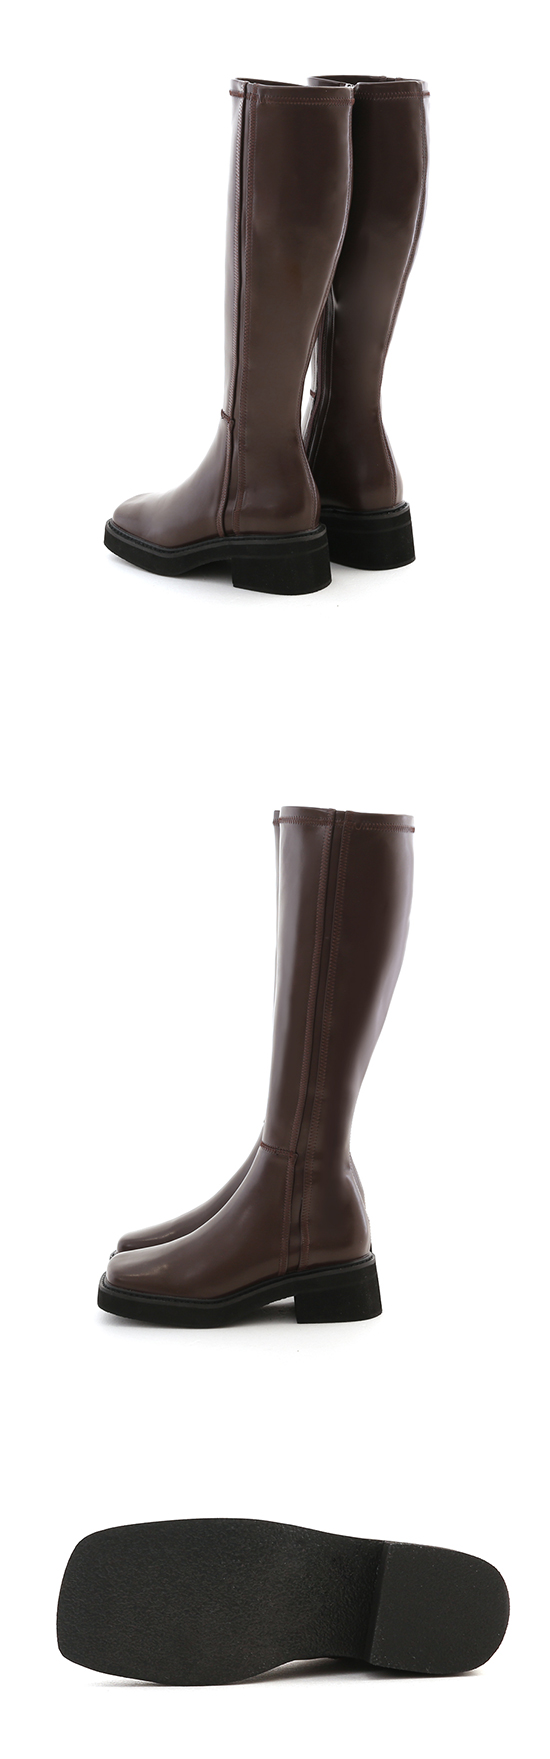 Stitched Square Toe Thick Sole Tall Boots Dark Brown